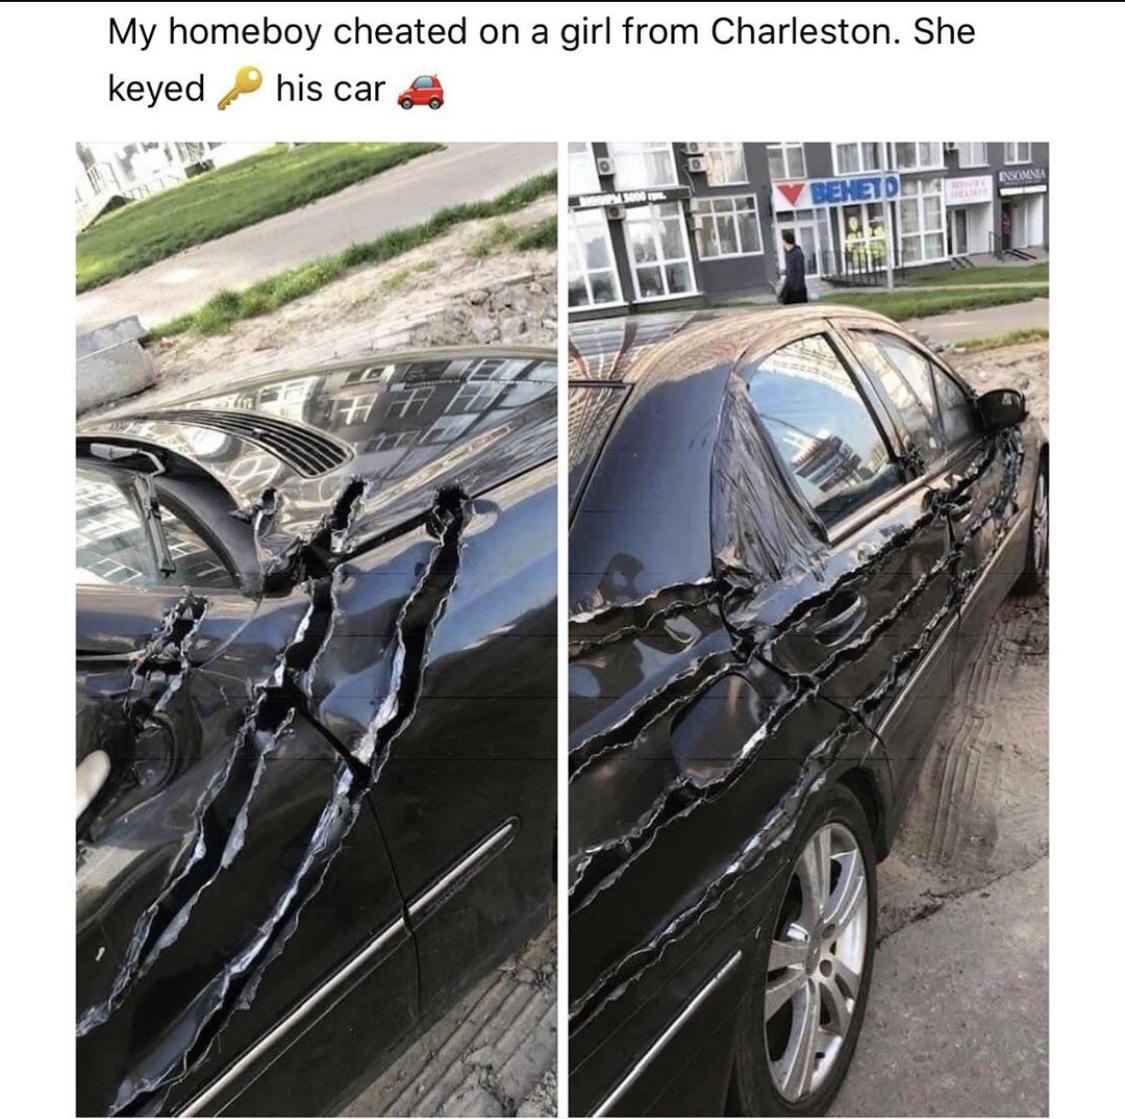 Fogell - My homeboy cheated on a girl from Charleston. She keyed his car a Beneti